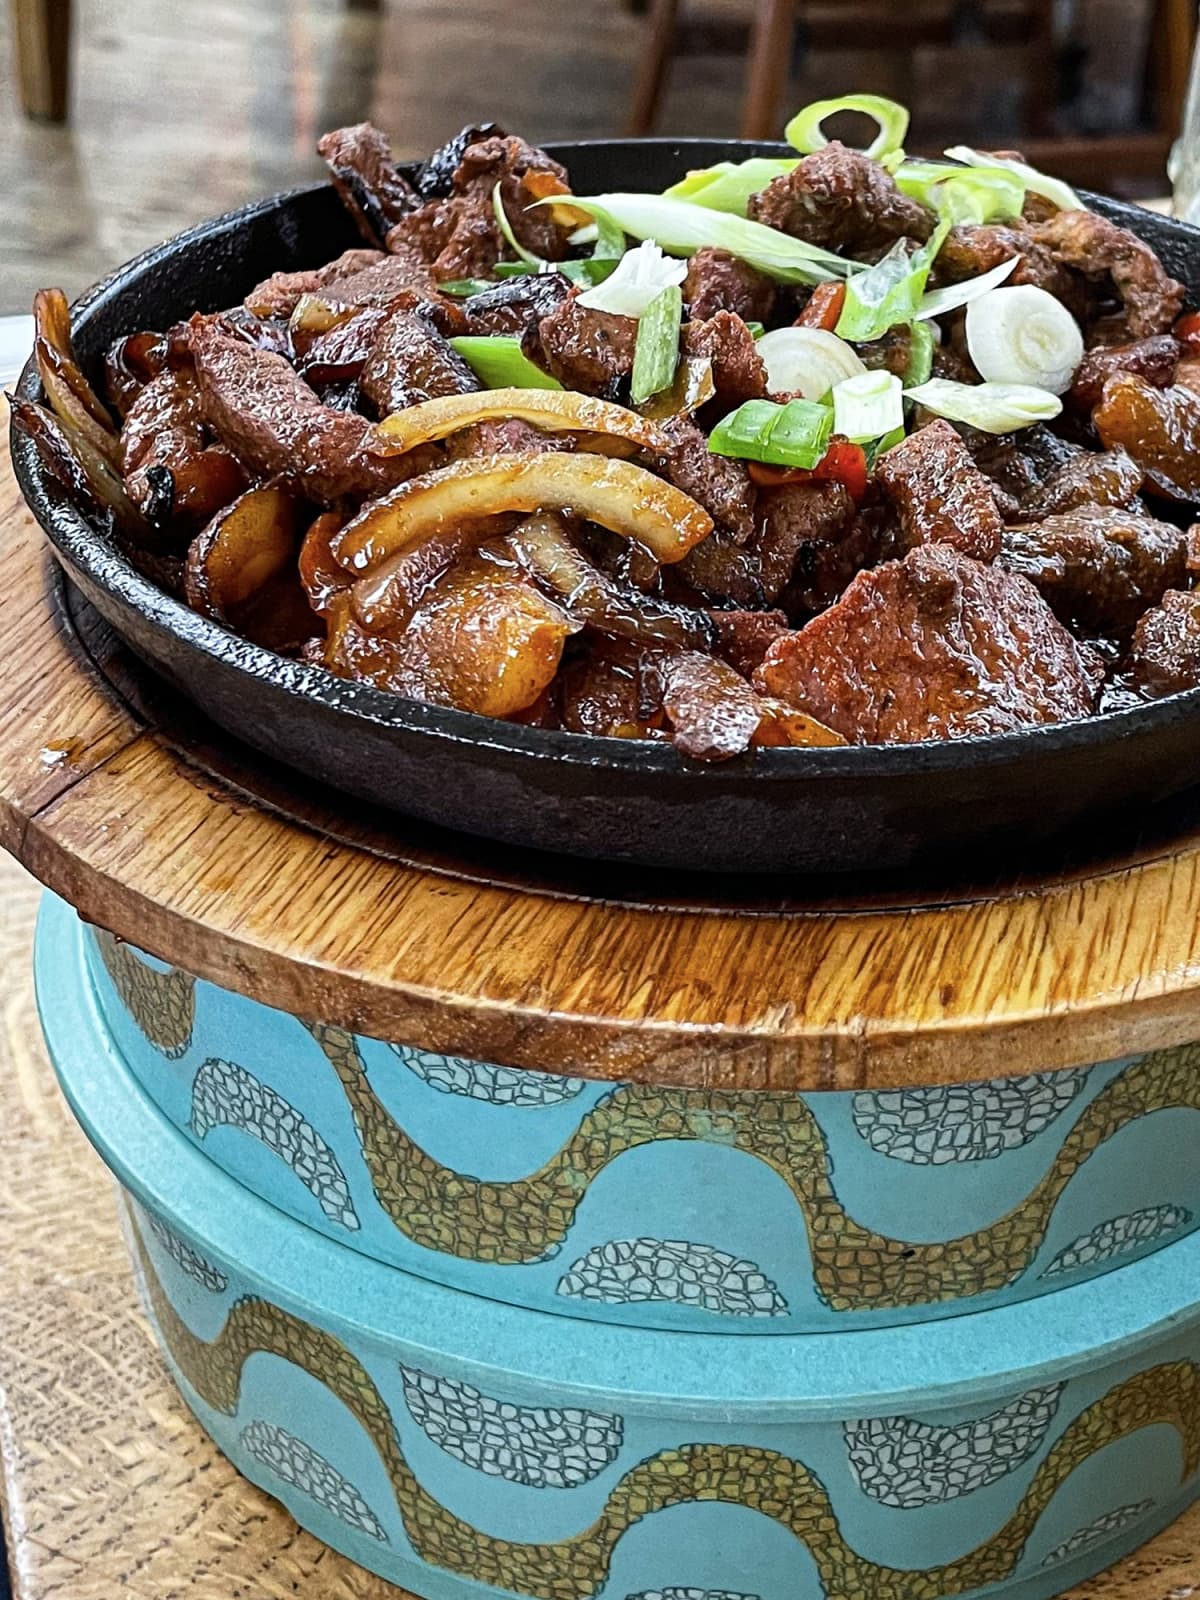 Cast iron pan on circular wood chopping board containing sizzling strips of grilled steak with stripped peppers and onions